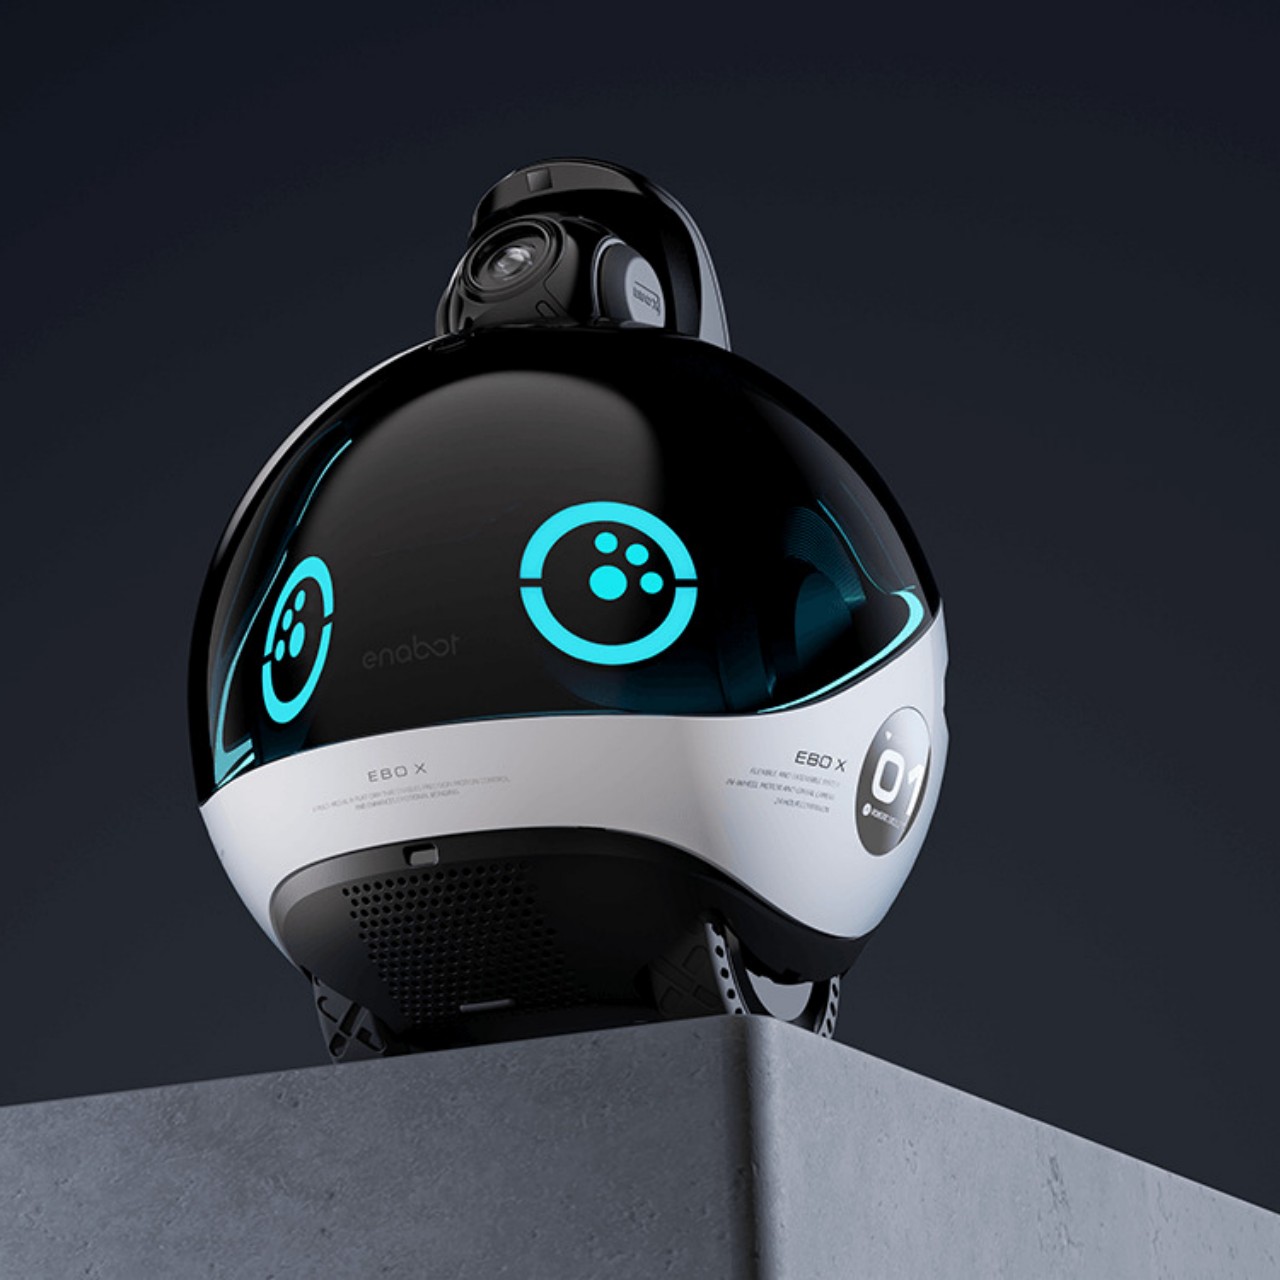 https://www.yankodesign.com/images/design_news/2023/02/enabot-ebo-x-is-a-security-robot-that-disarms-you-with-its-cuteness/enabot-ebo-x-2.jpg